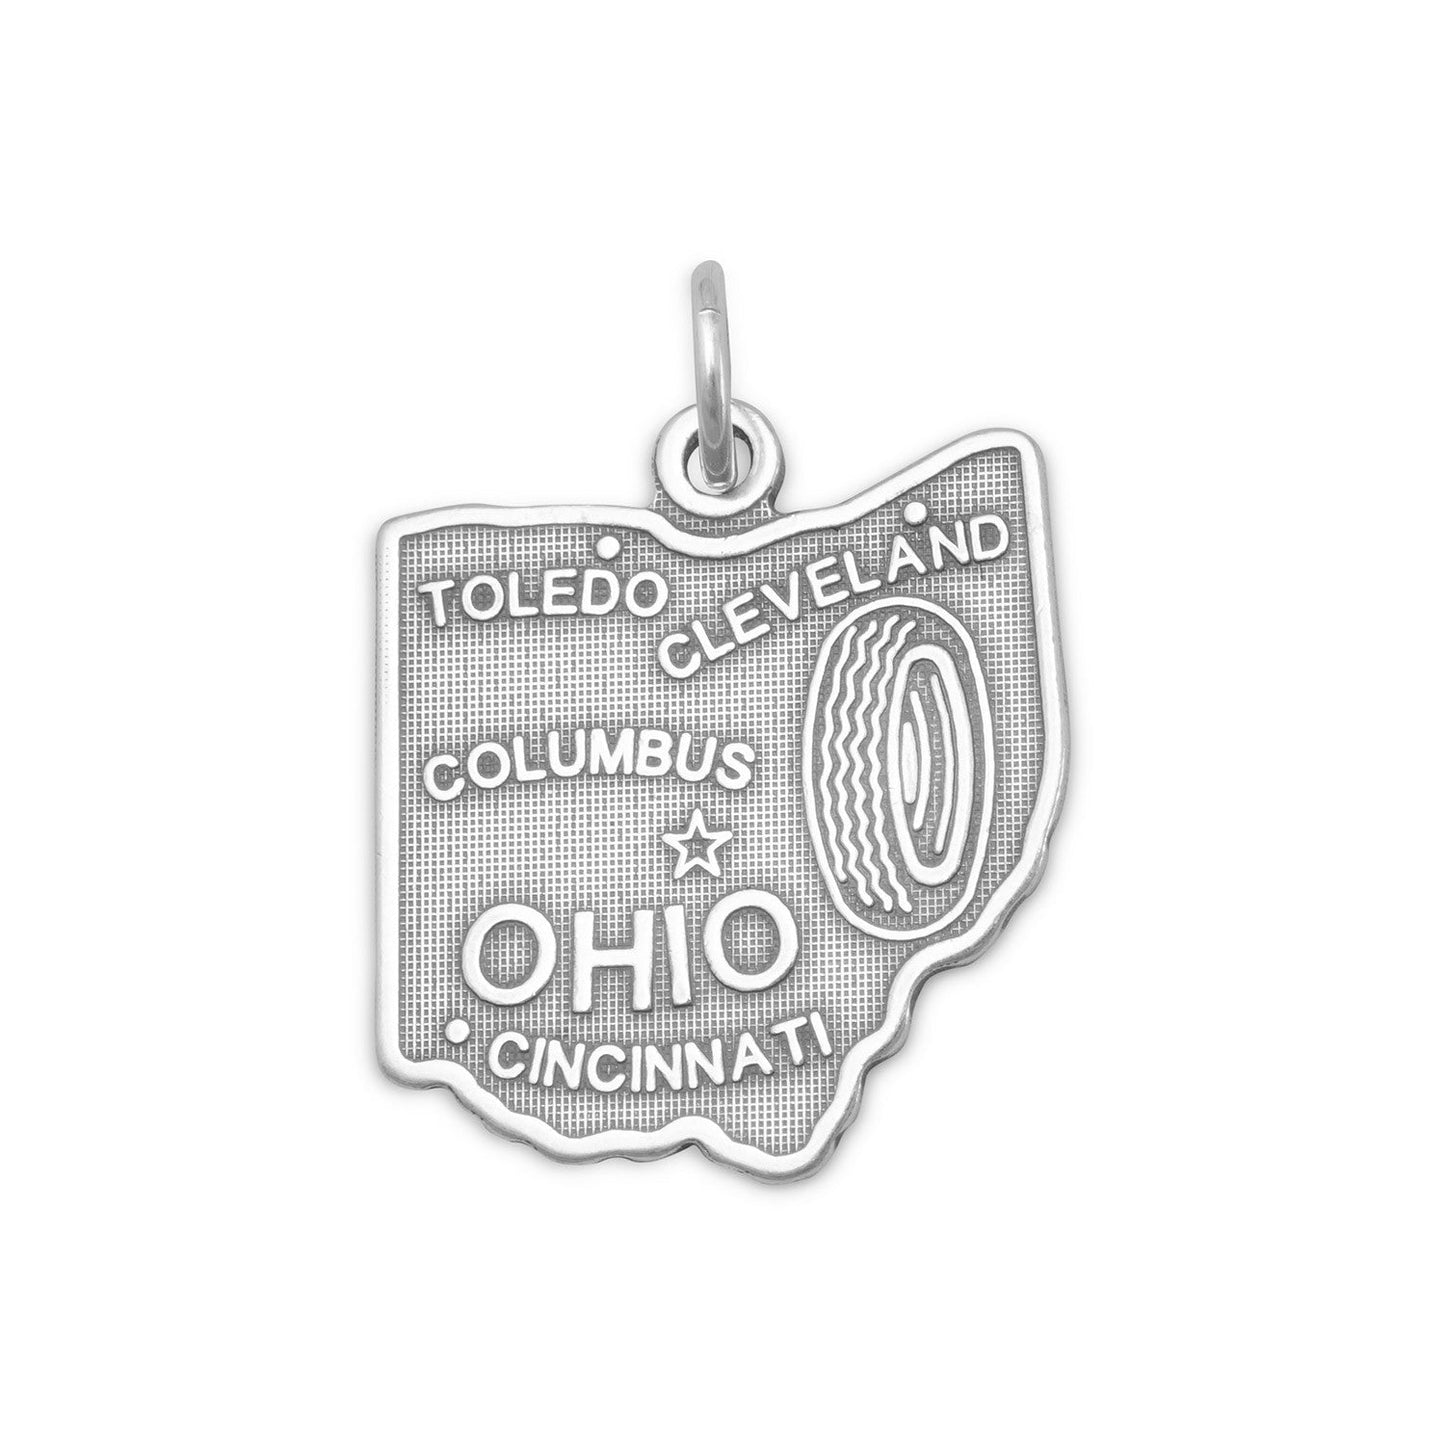 Oxidized Sterling Silver Ohio State Charm, Made in USA